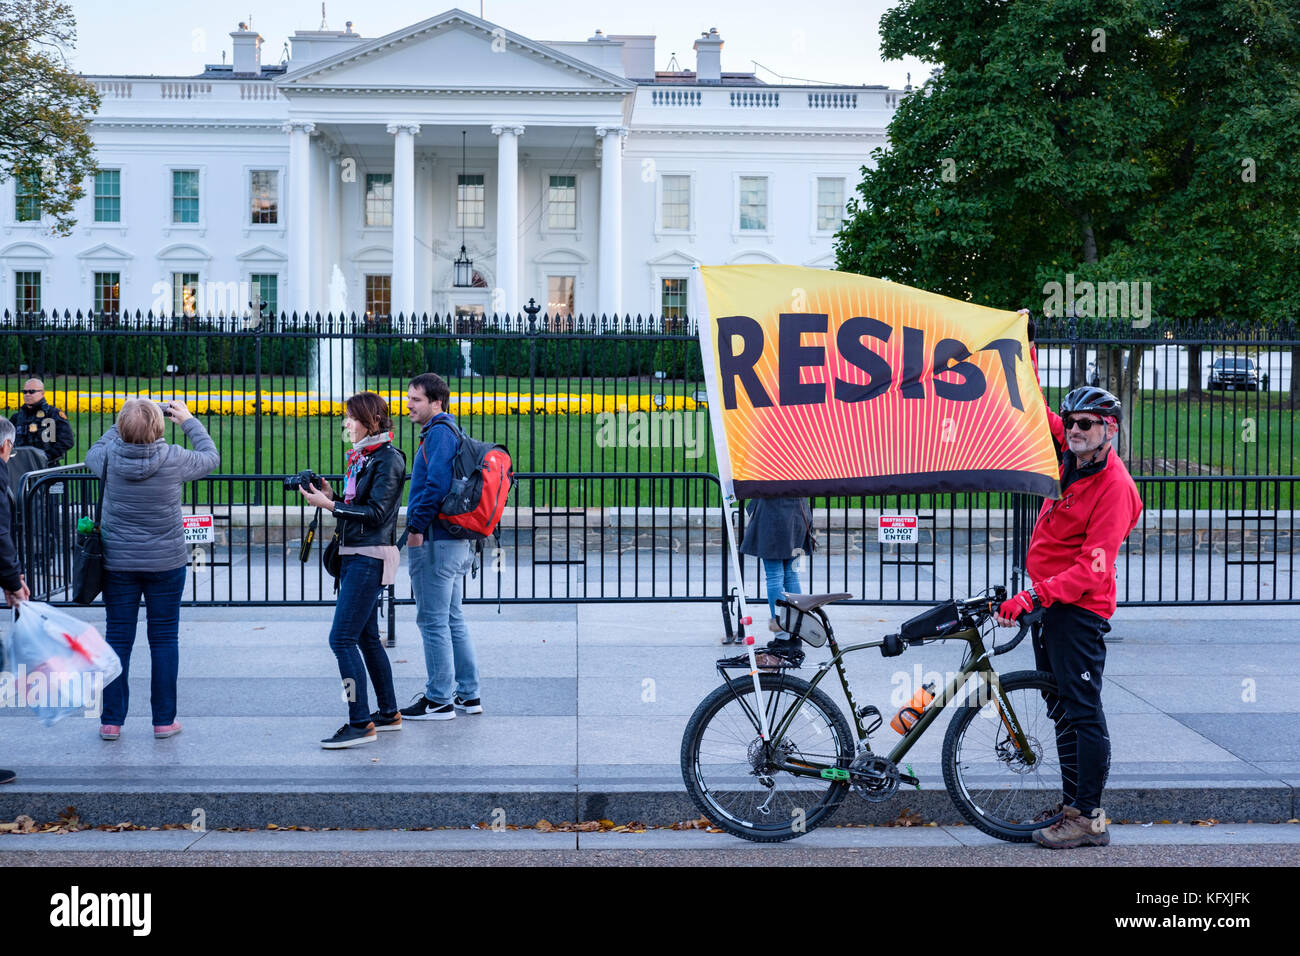 Anti-Trump resistance protester in front of the White House holding a Resist banner/flag, protesting against president Trump, Washington, DC, USA. Stock Photo